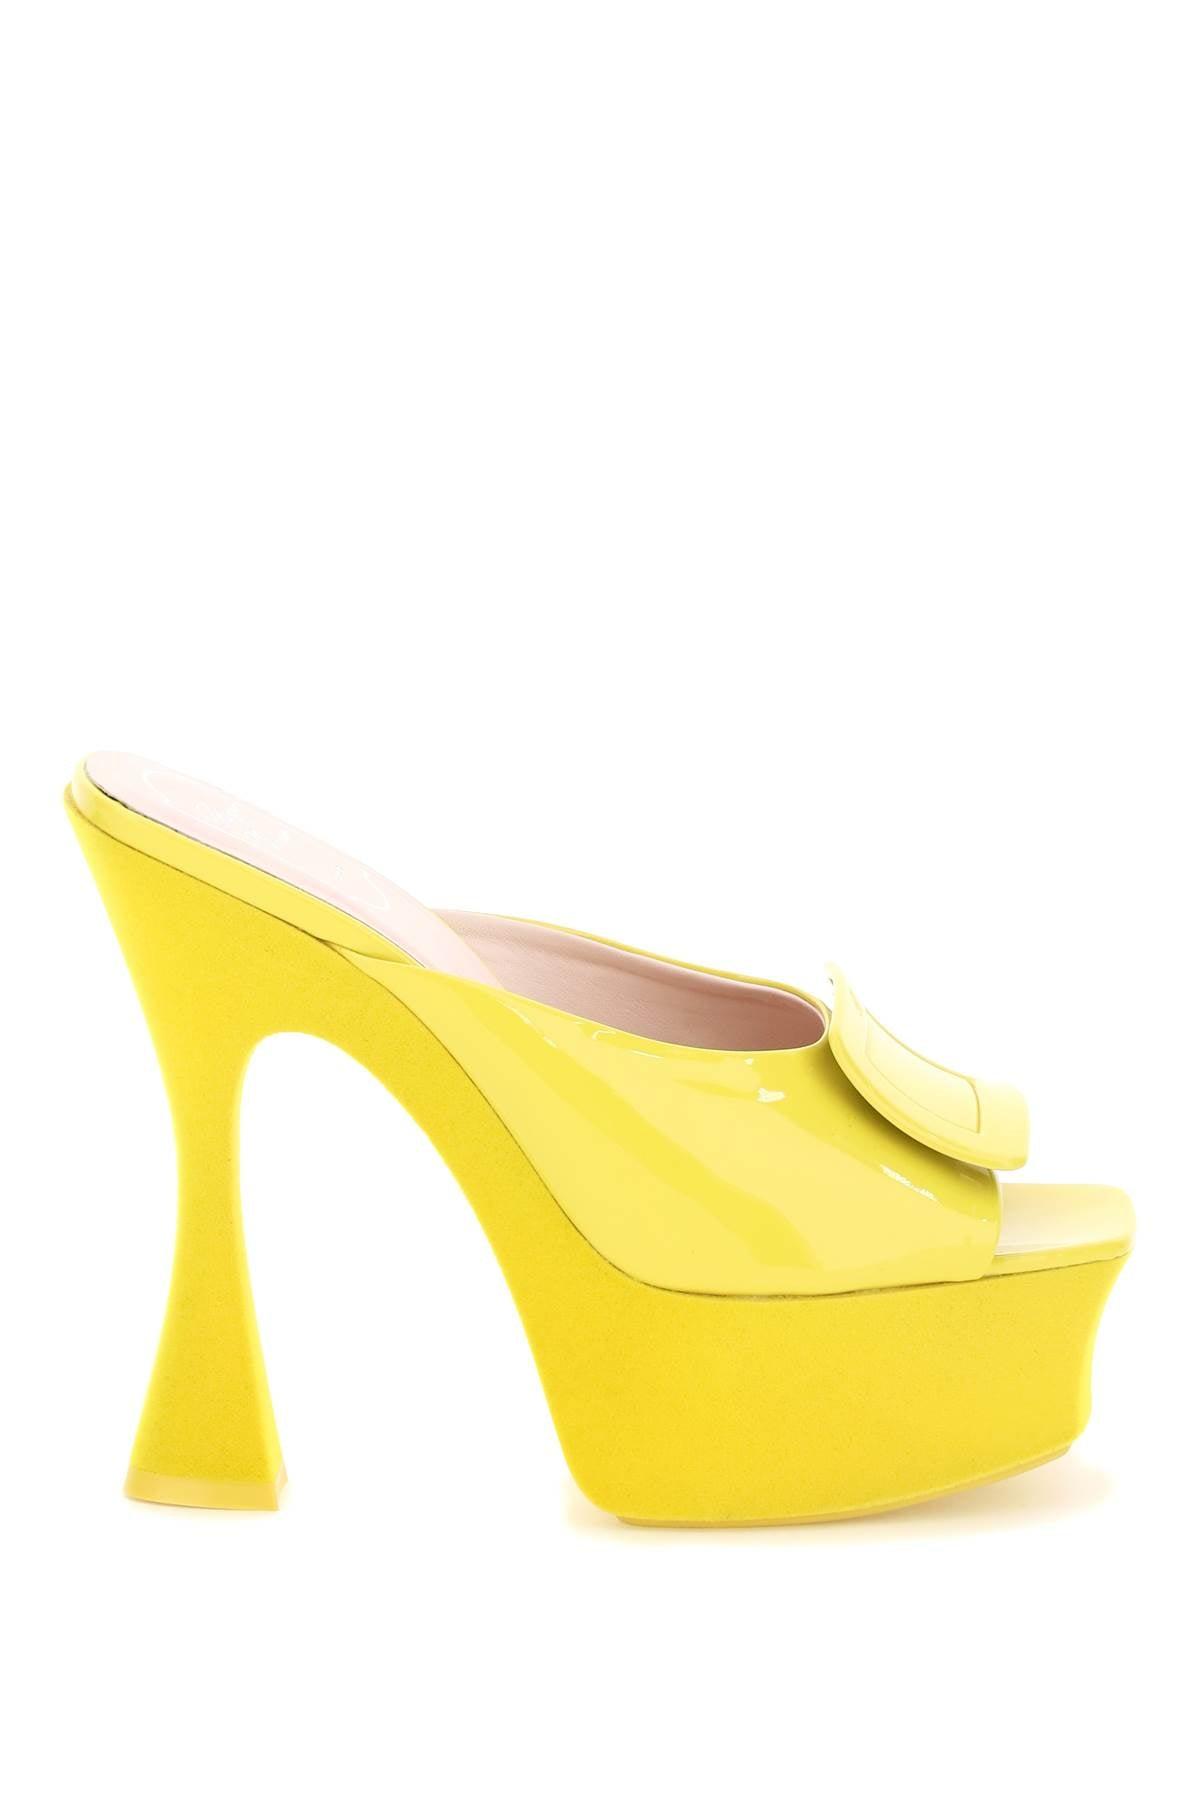 Roger Vivier Patent Leather Platform Covered Buckle Mules in Yellow | Lyst